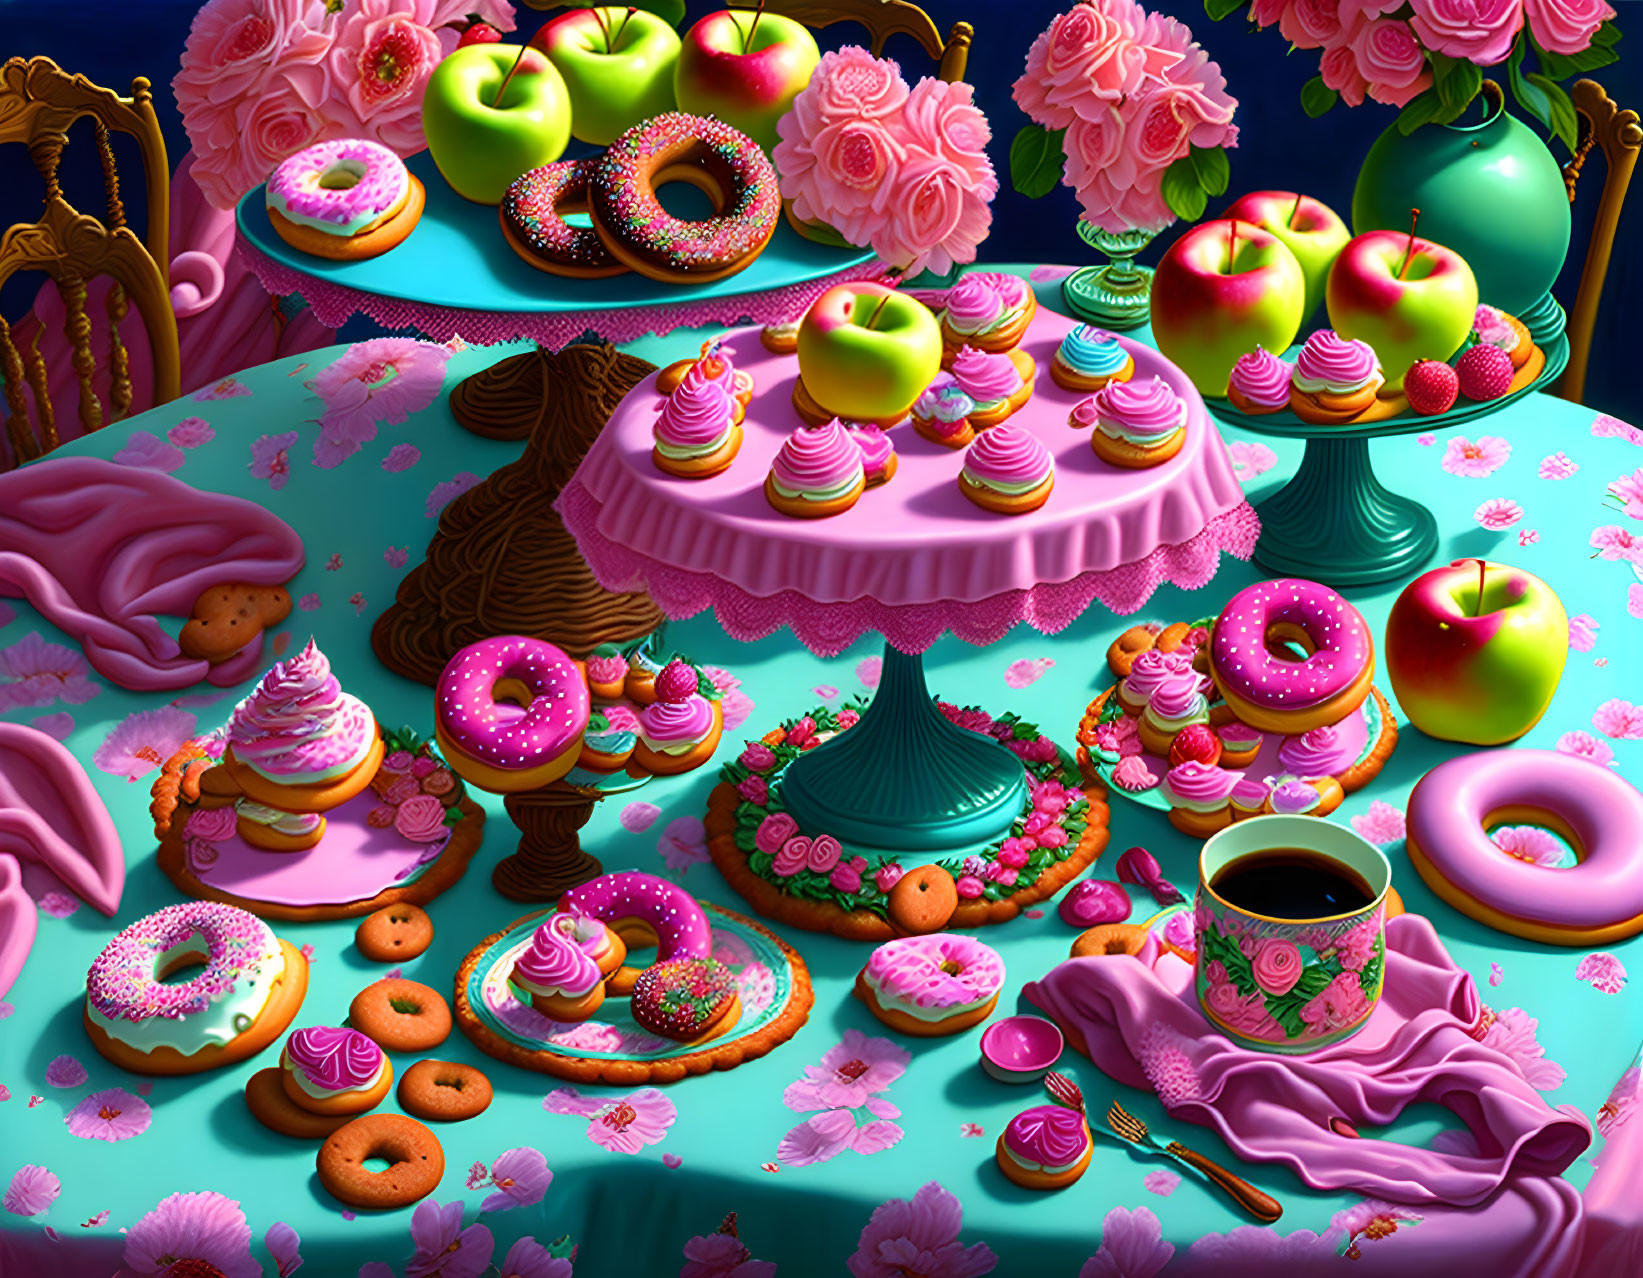 I Dreamed of Donuts